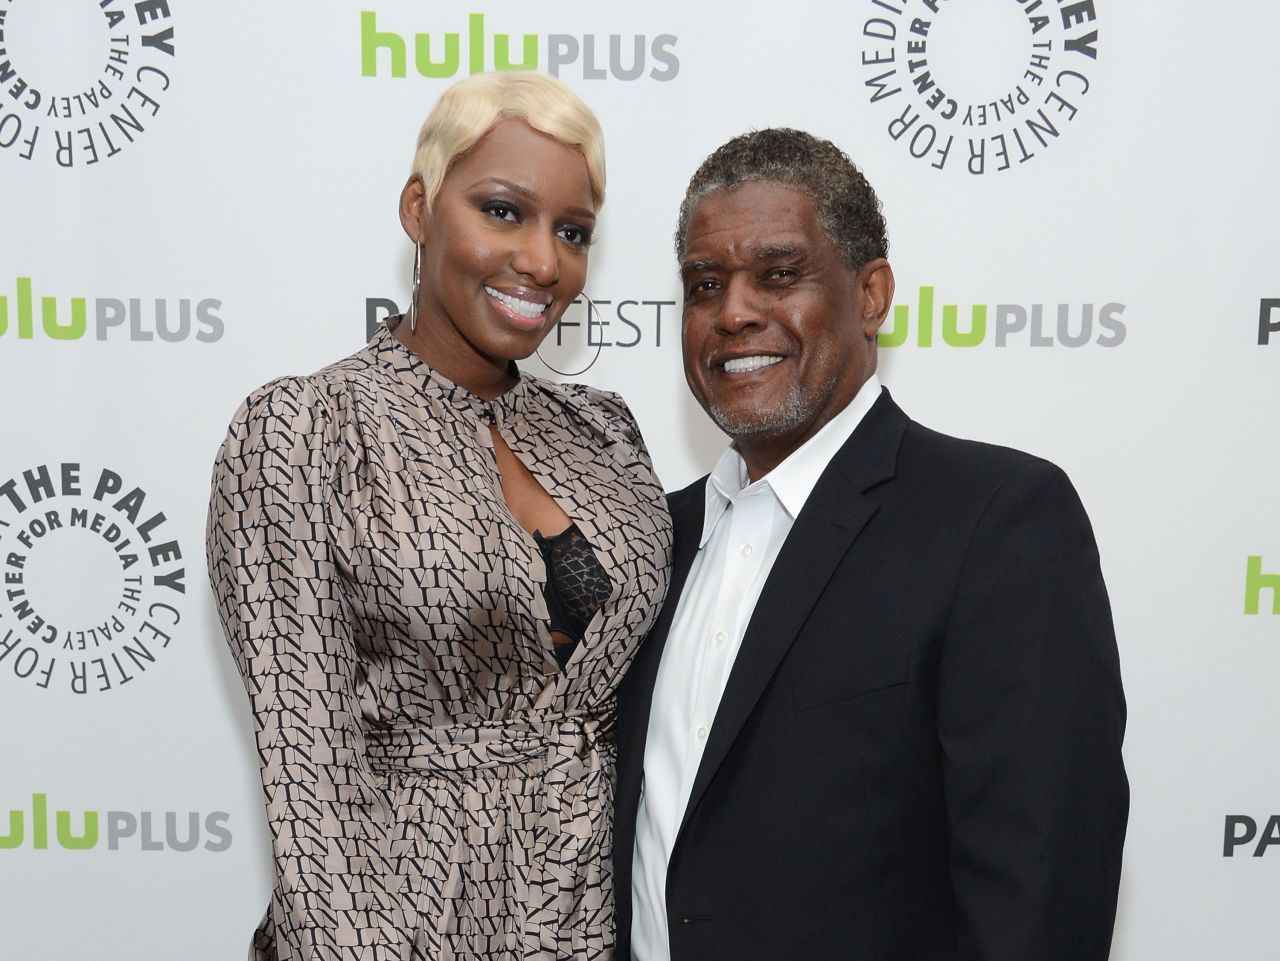 One of reality TV's most adorable matches is officially back on. "Real Housewives of Atlanta" star NeNe Leakes divorced her husband of 13 years, Gregg, in 2011, only to <a href="http://www.eonline.com/news/375762/nene-leakes-confirms-engagement-to-ex-husband-gregg-leakes-on-jimmy-fallon" target="_blank" target="_blank">get married to him again </a>in 2013. 